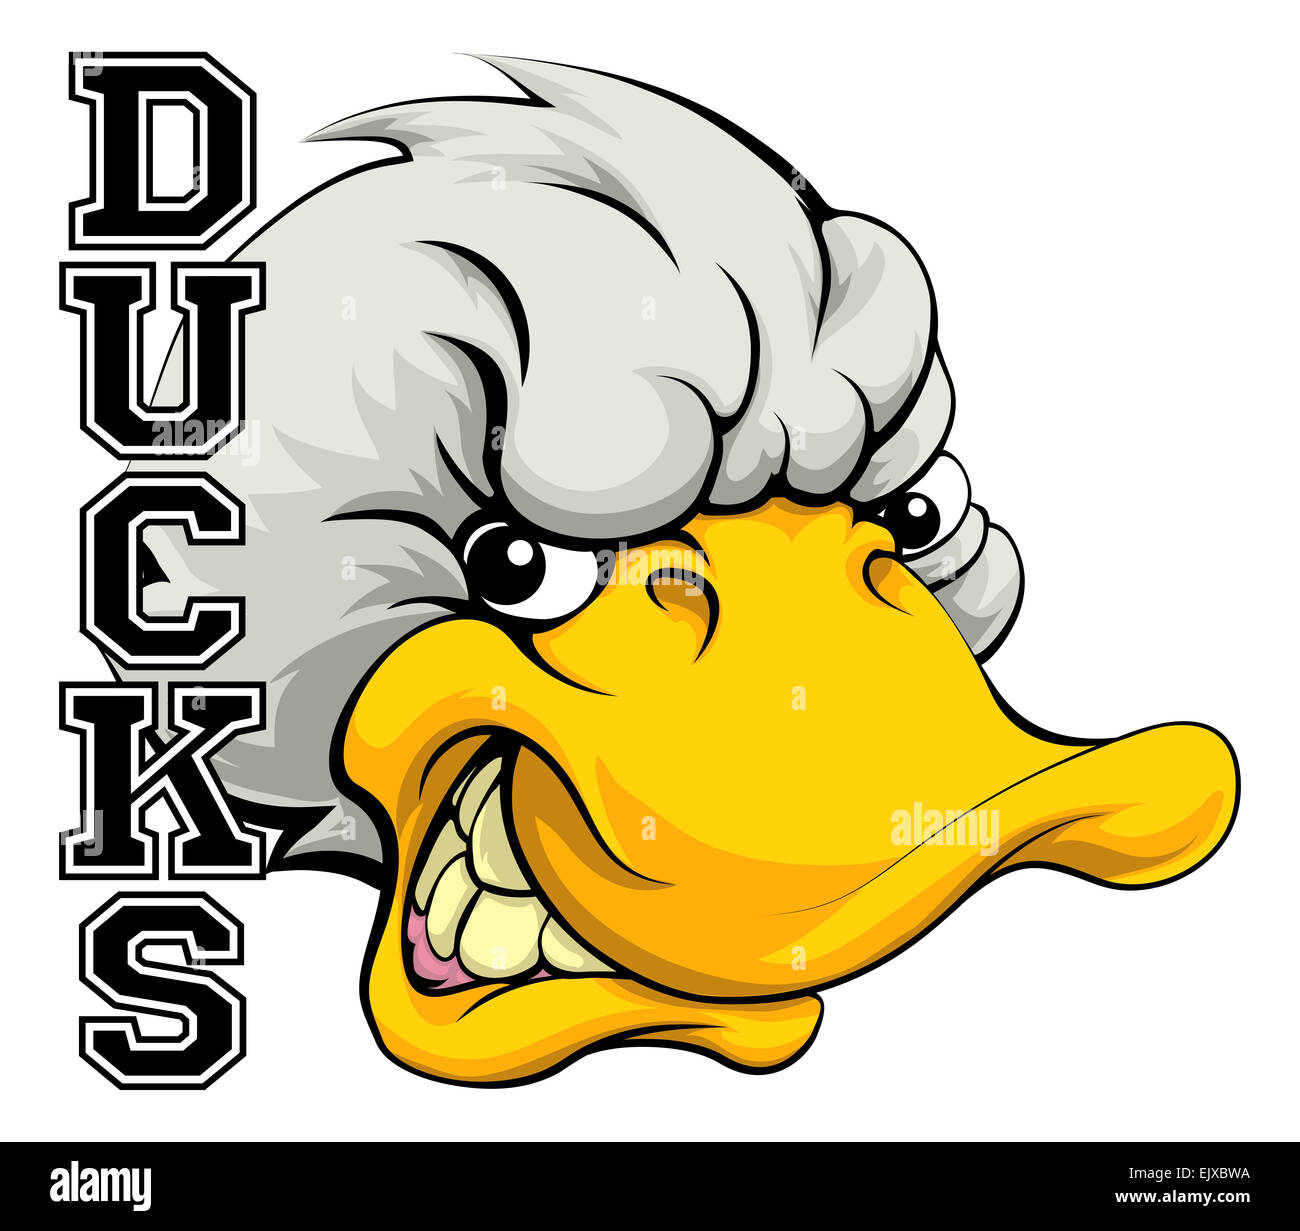 An illustration of a cartoon duck sports team mascot with the text Ducks Stock Photo